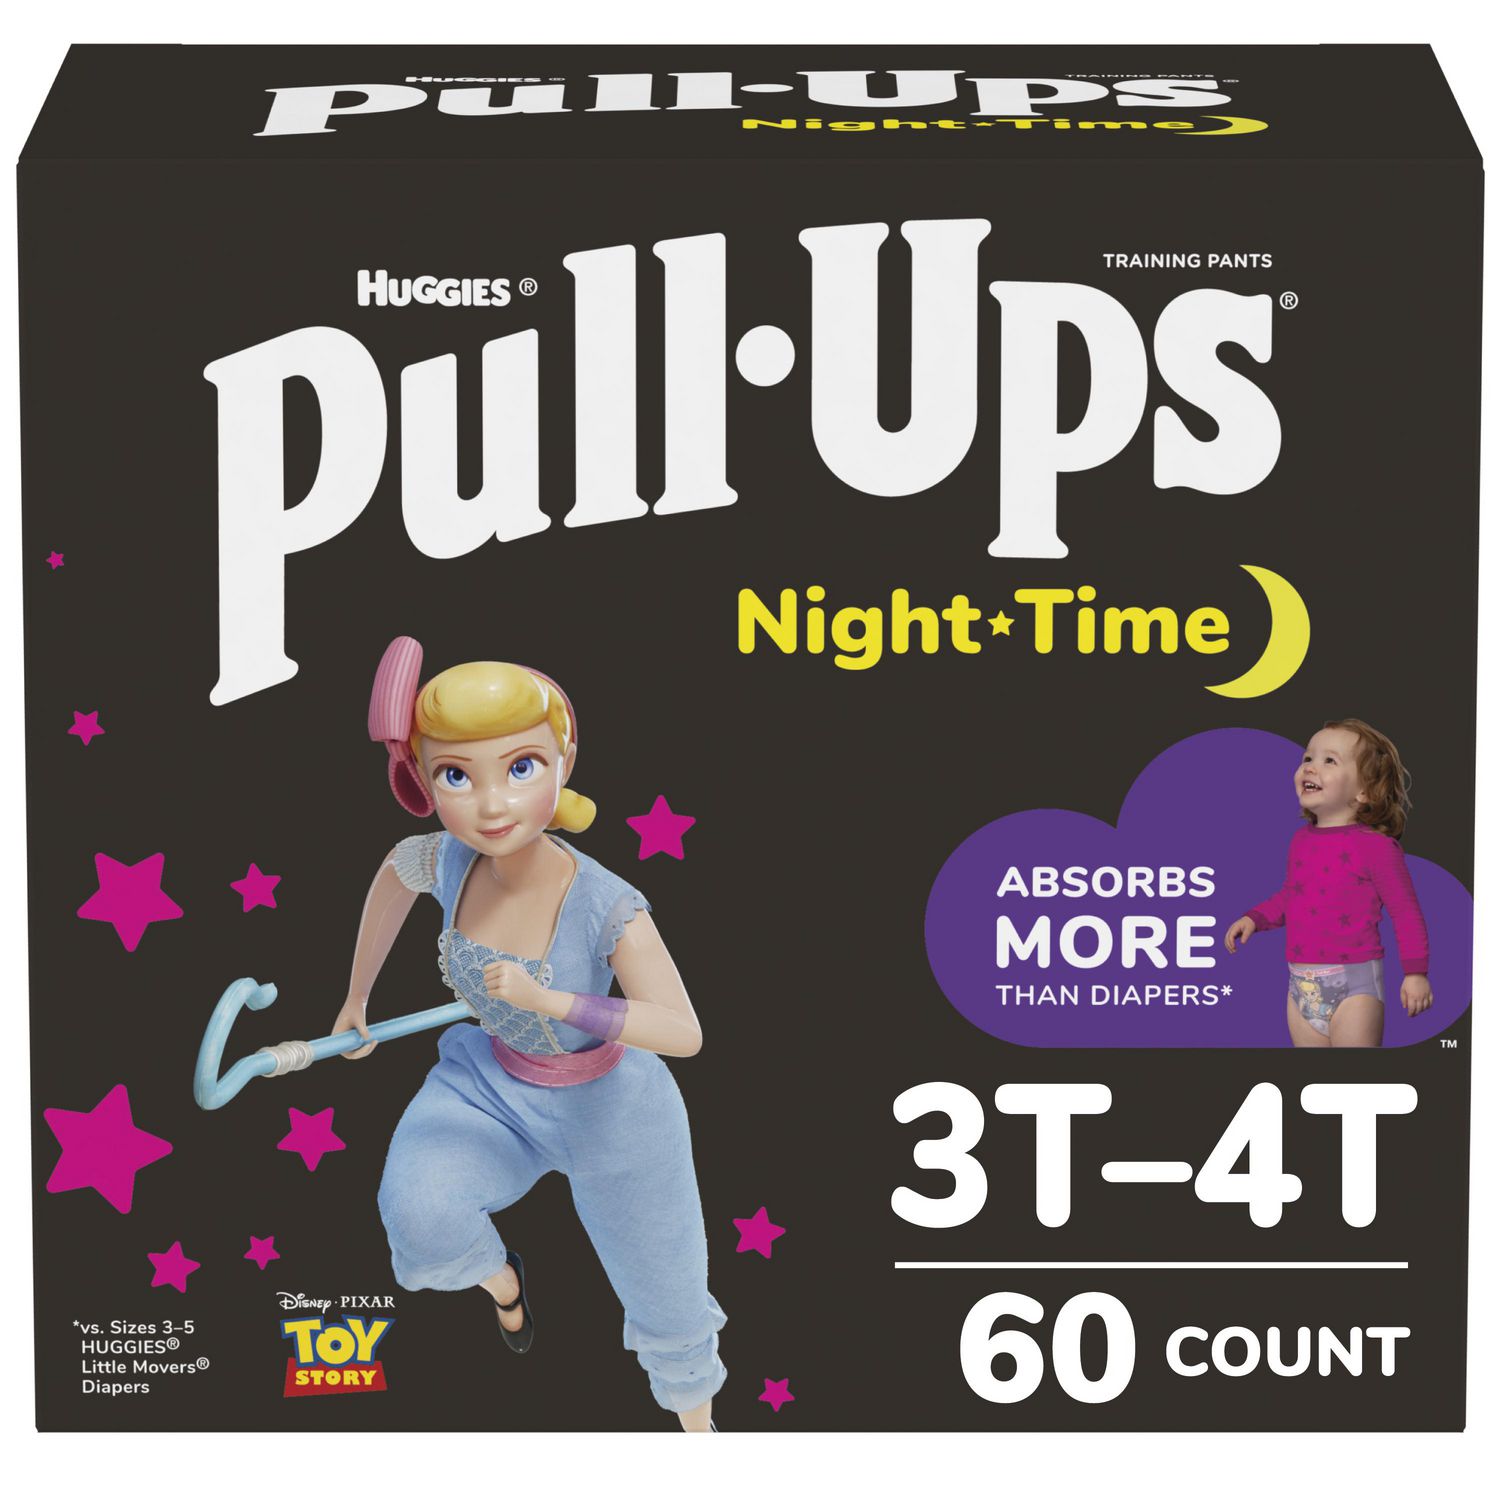 40 Pieces. Trusty Pull Up Adult Pants Diapers (XL)